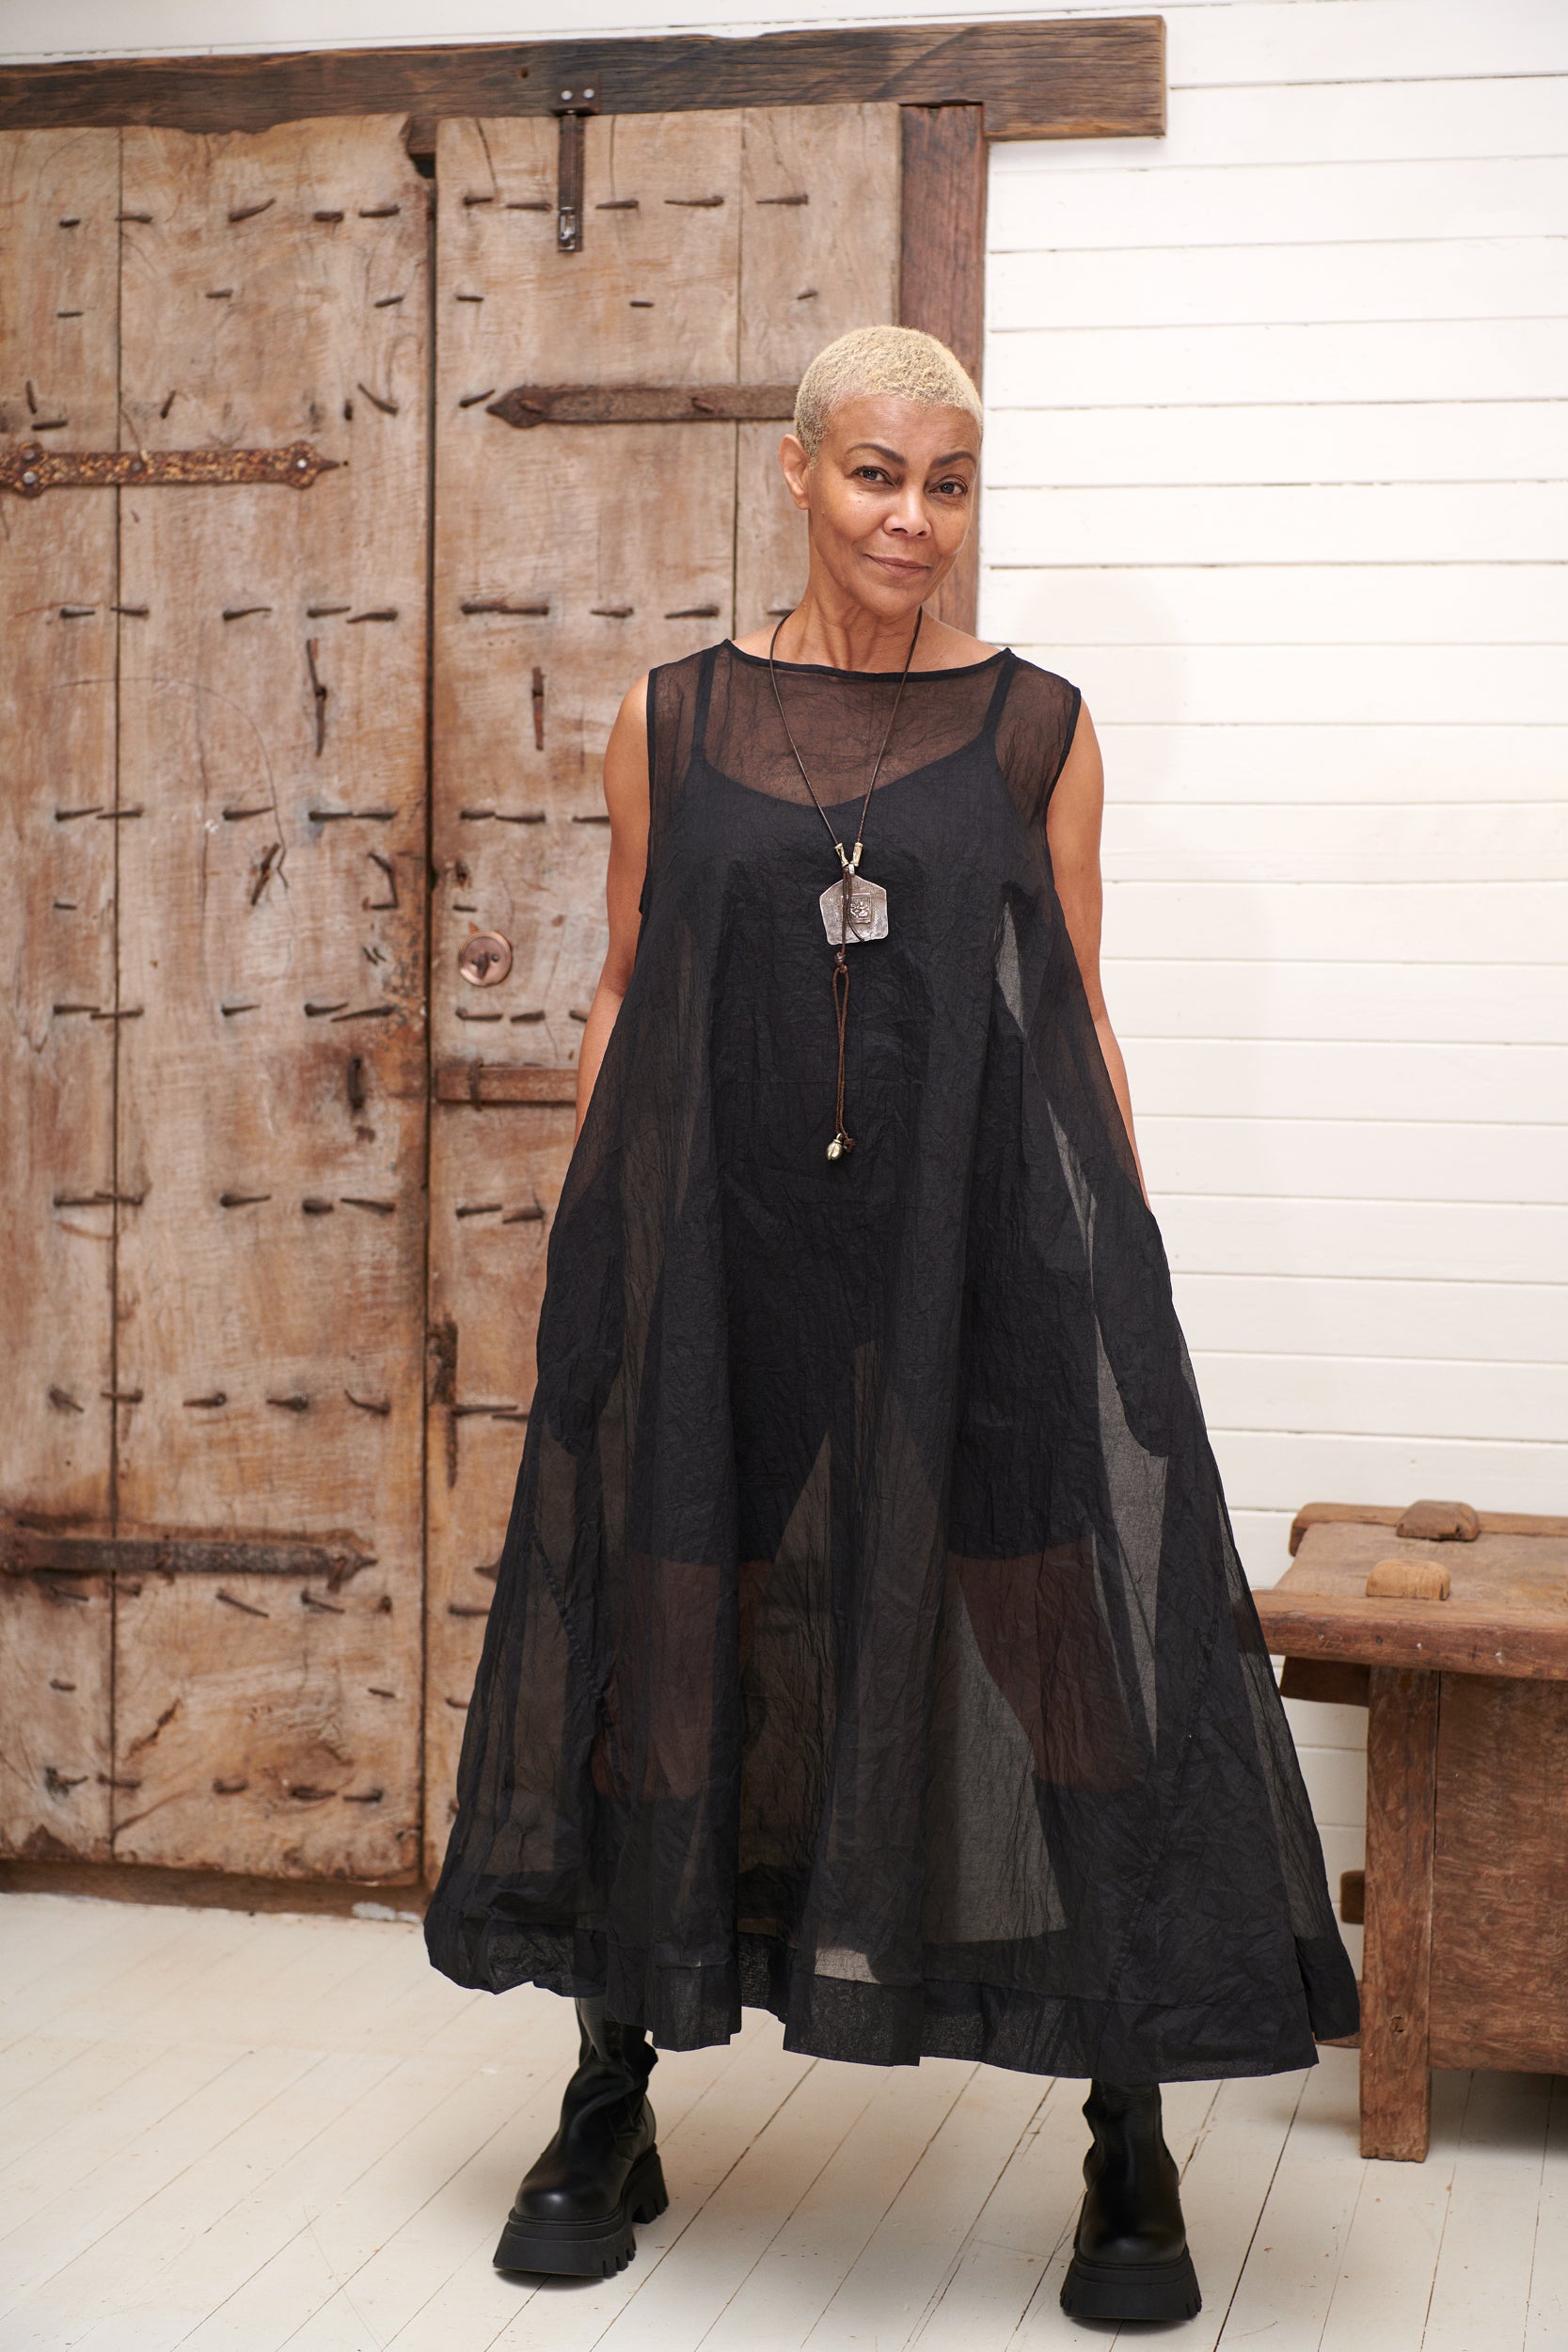 A MegbyDesign model is wearing a black A line dress made from a sheer cotton organza